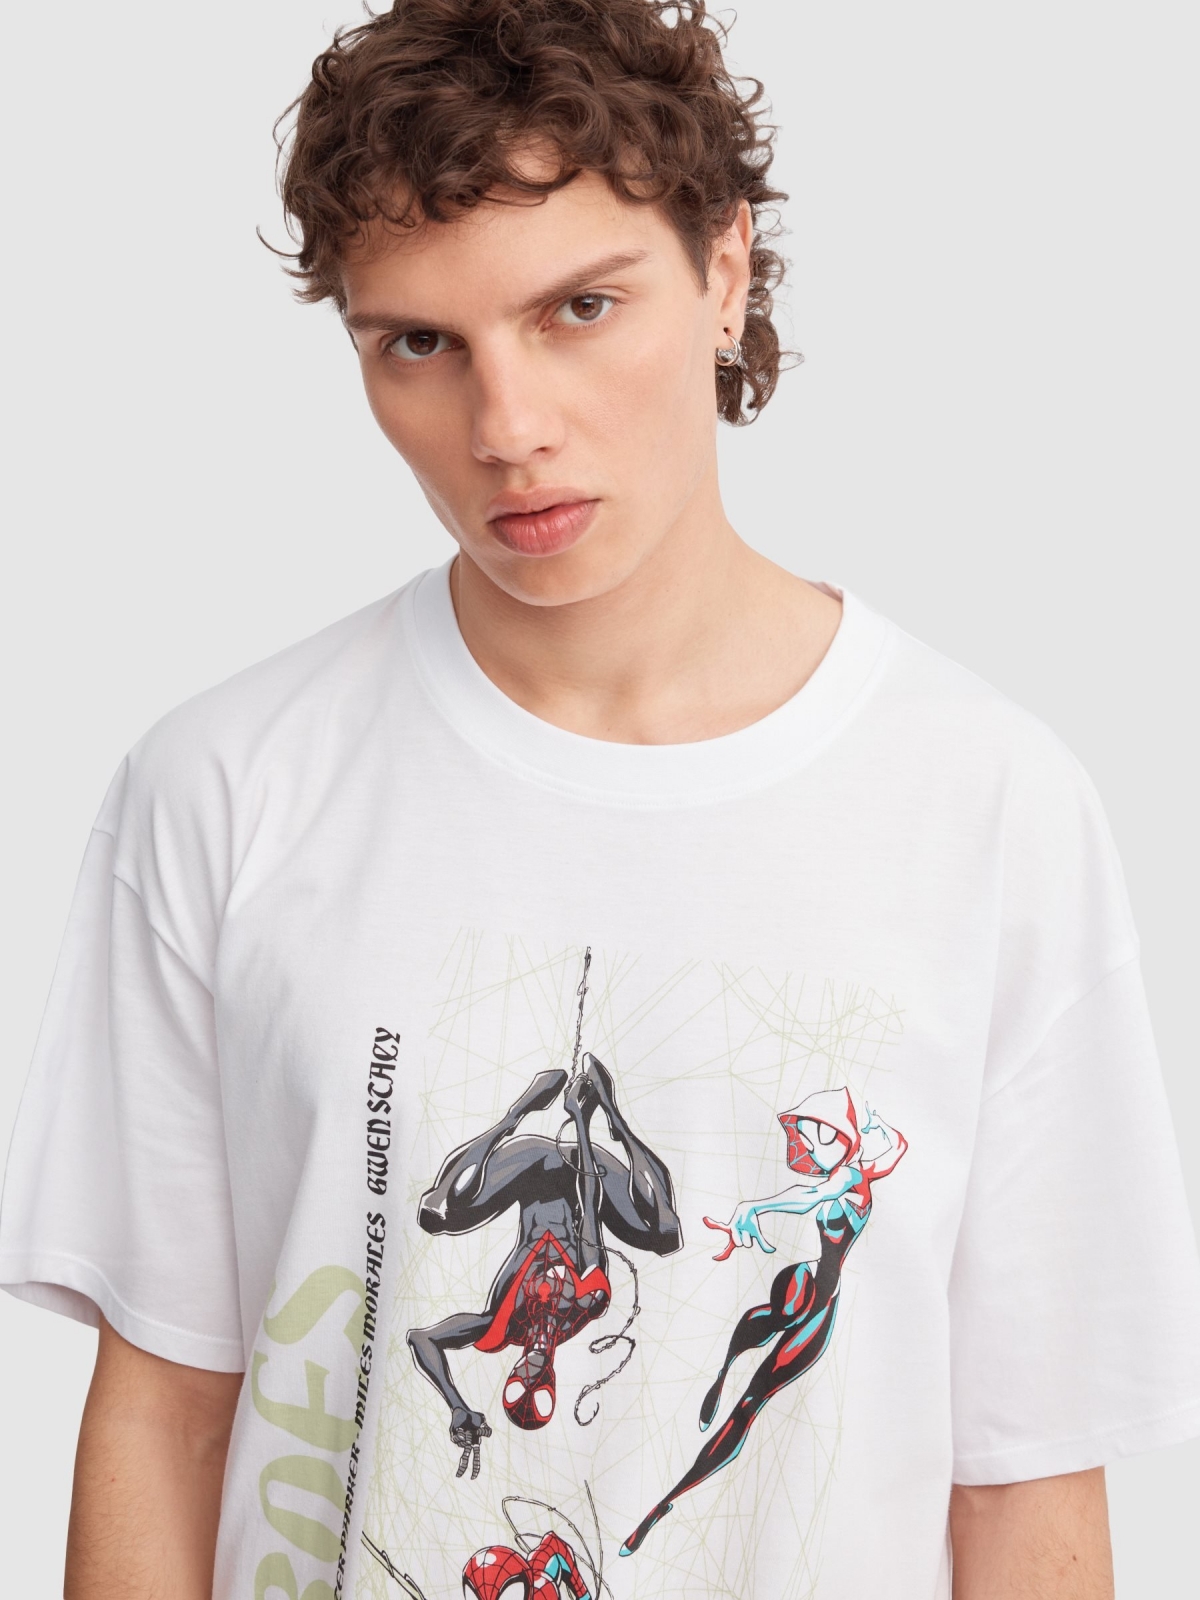 Spiderman Heroes T-shirt white detail view